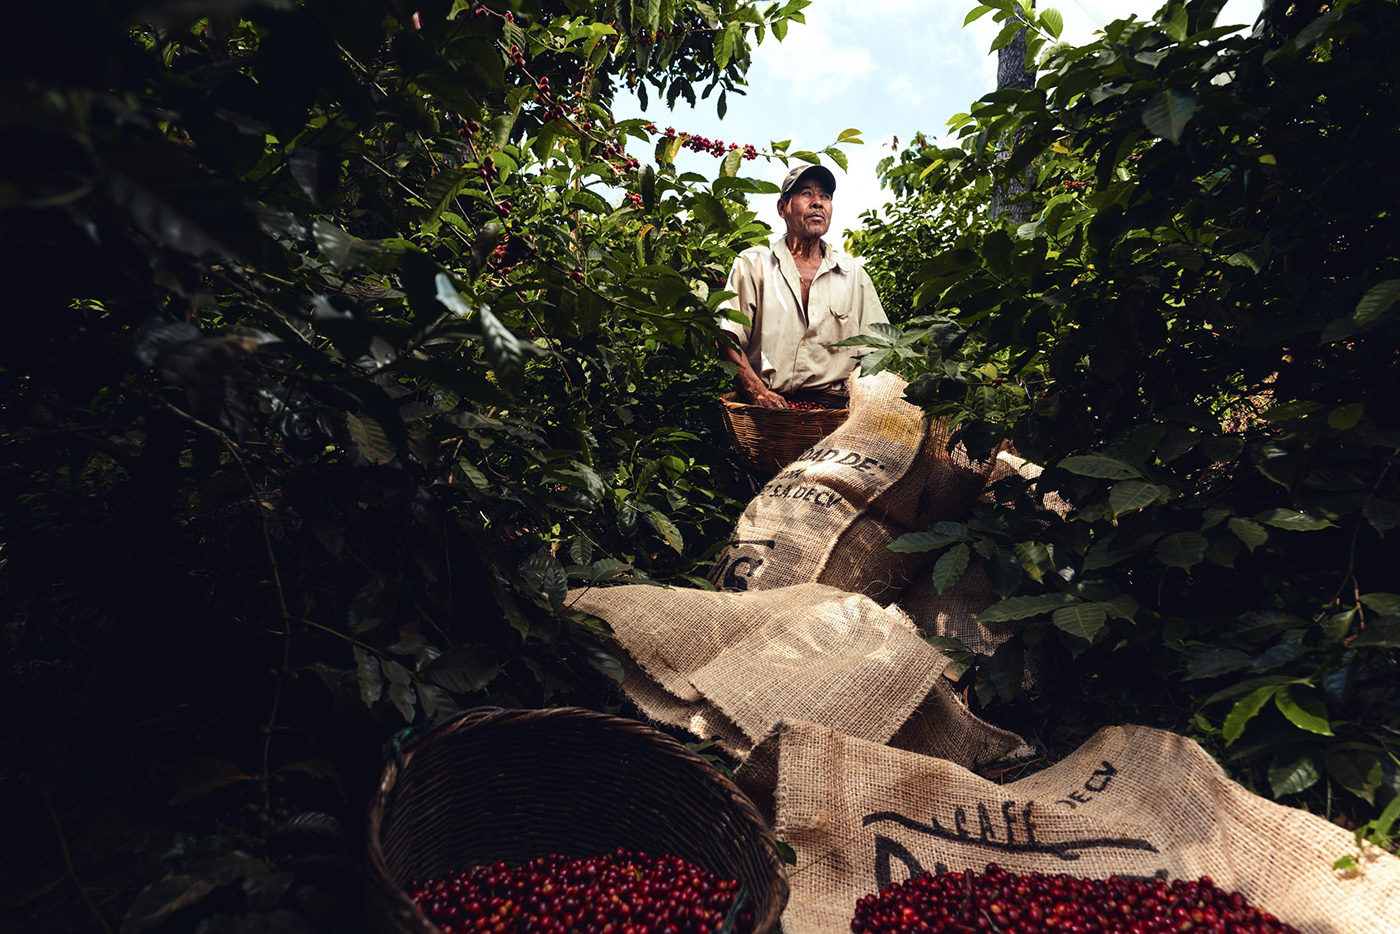 Photography  cinematography video Documentary  Coffee farm culture personal project